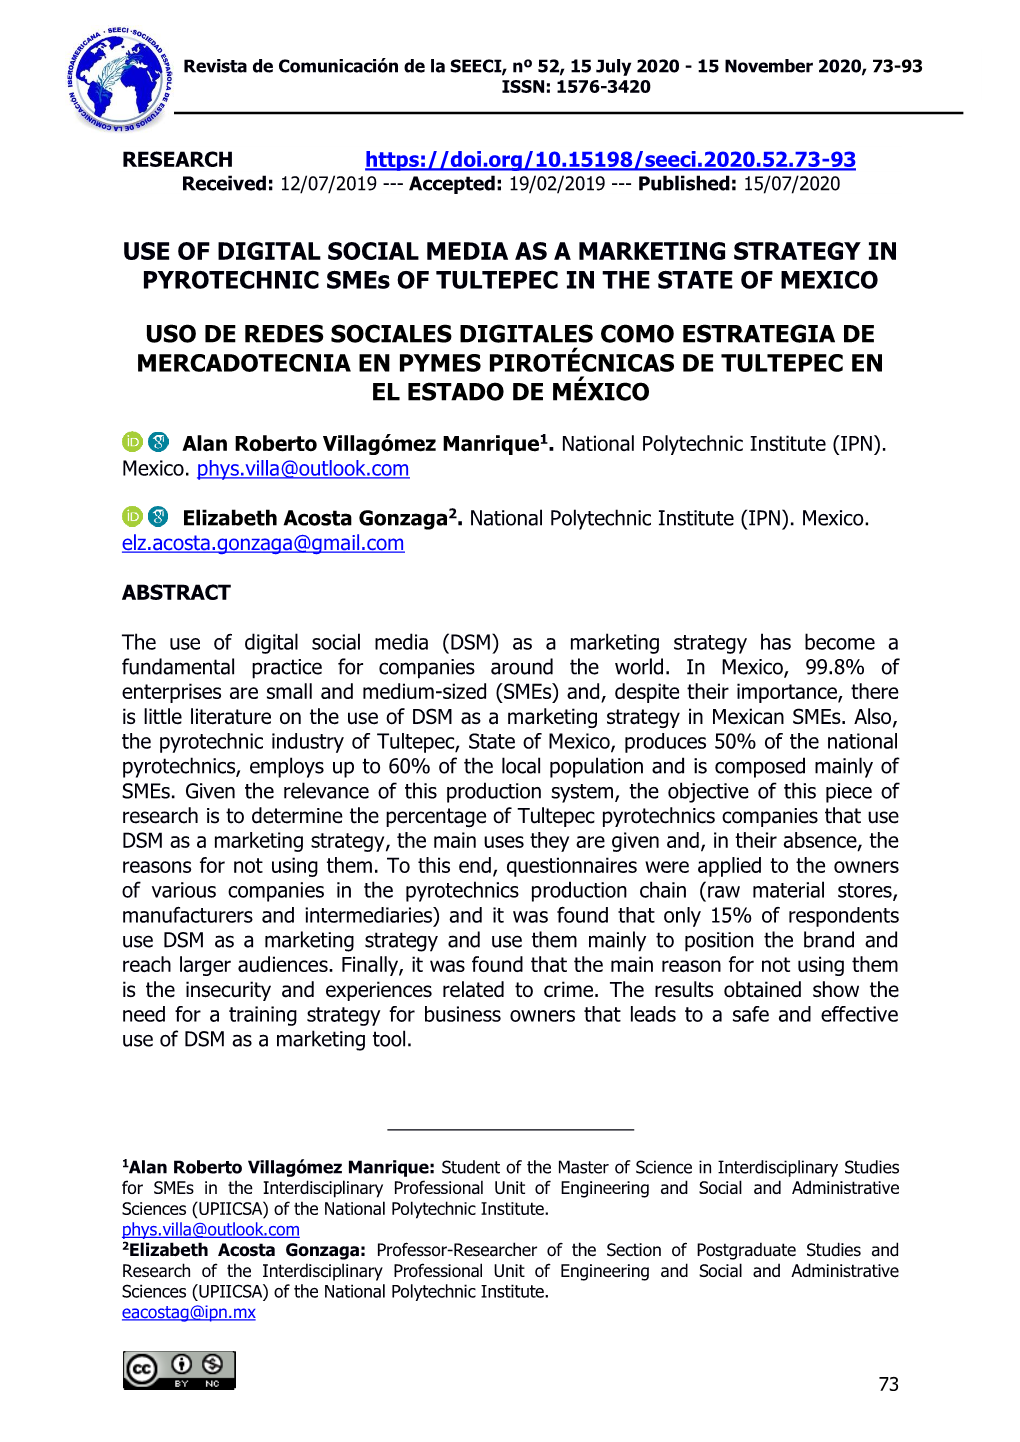 USE of DIGITAL SOCIAL MEDIA AS a MARKETING STRATEGY in PYROTECHNIC Smes of TULTEPEC in the STATE of MEXICO